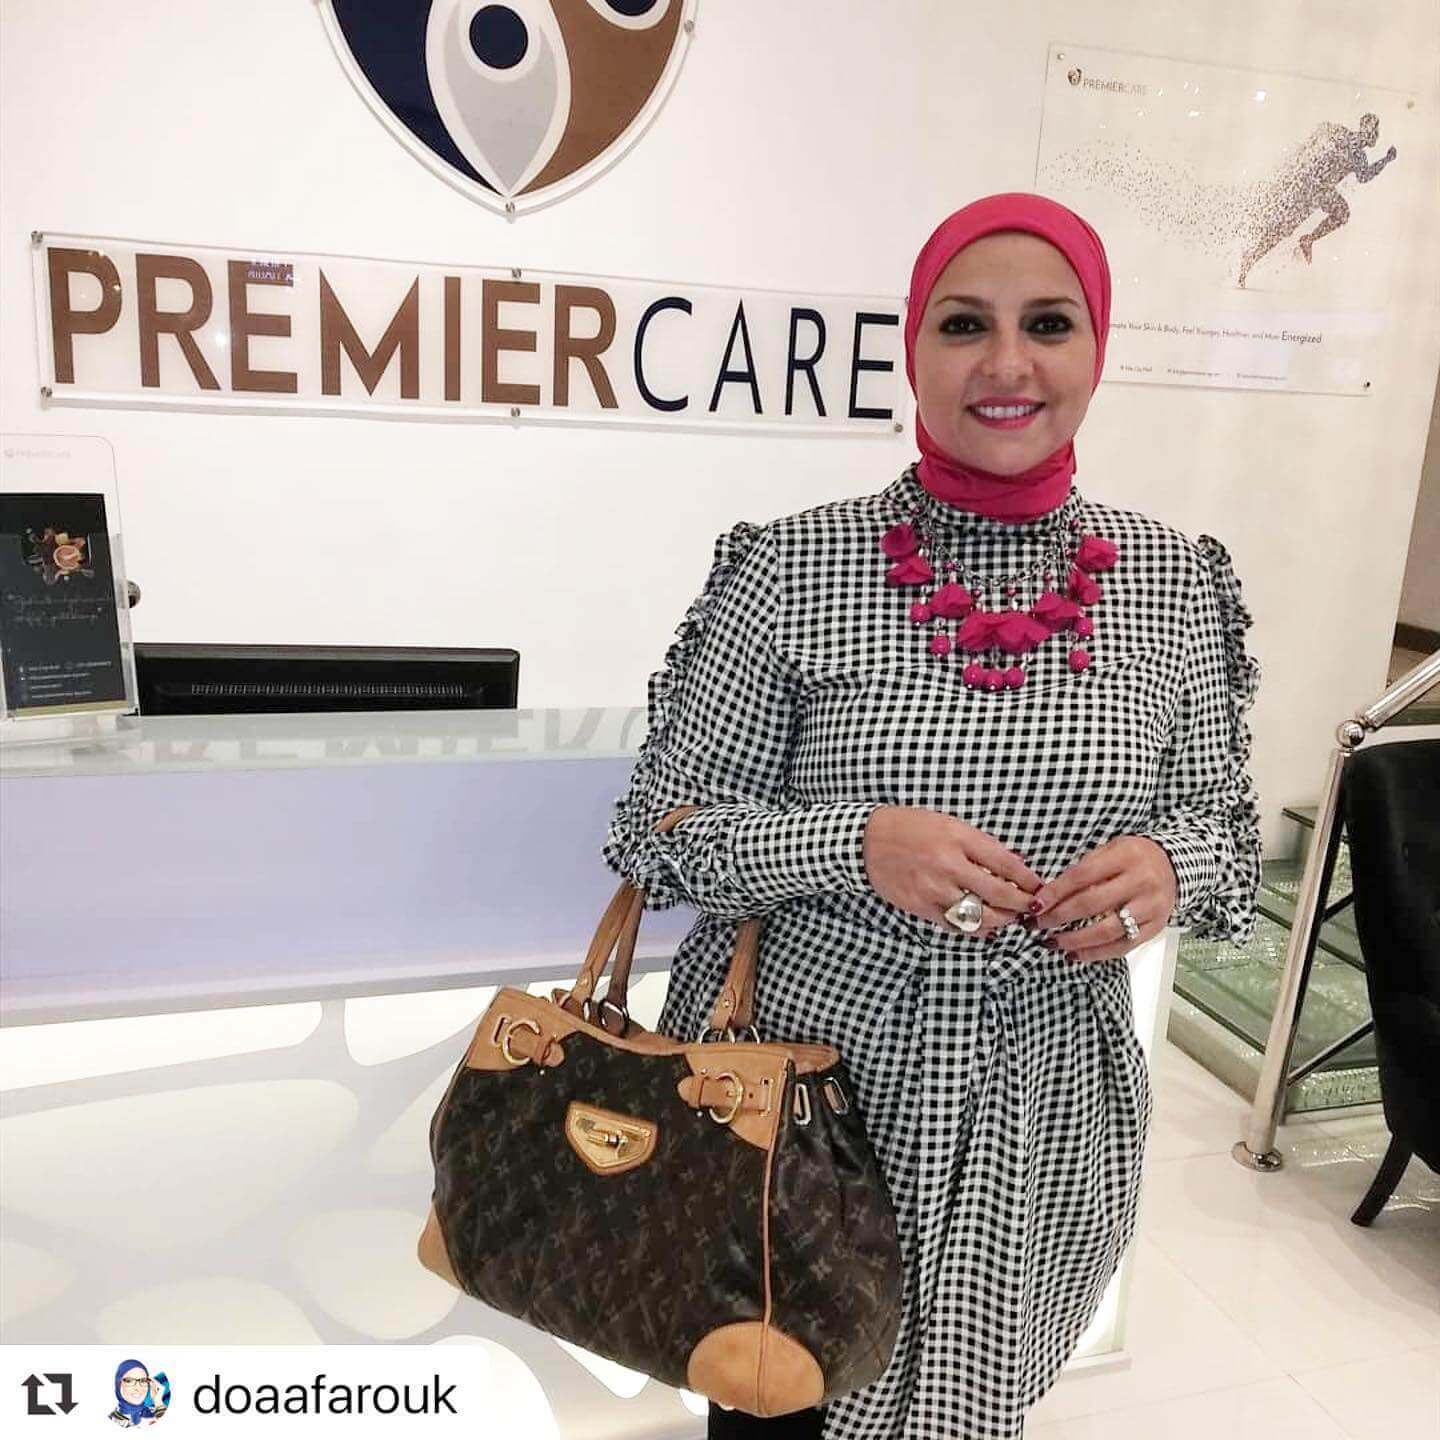 Our sweetest guest Doaa Farouk Had her IV vitamin drip session